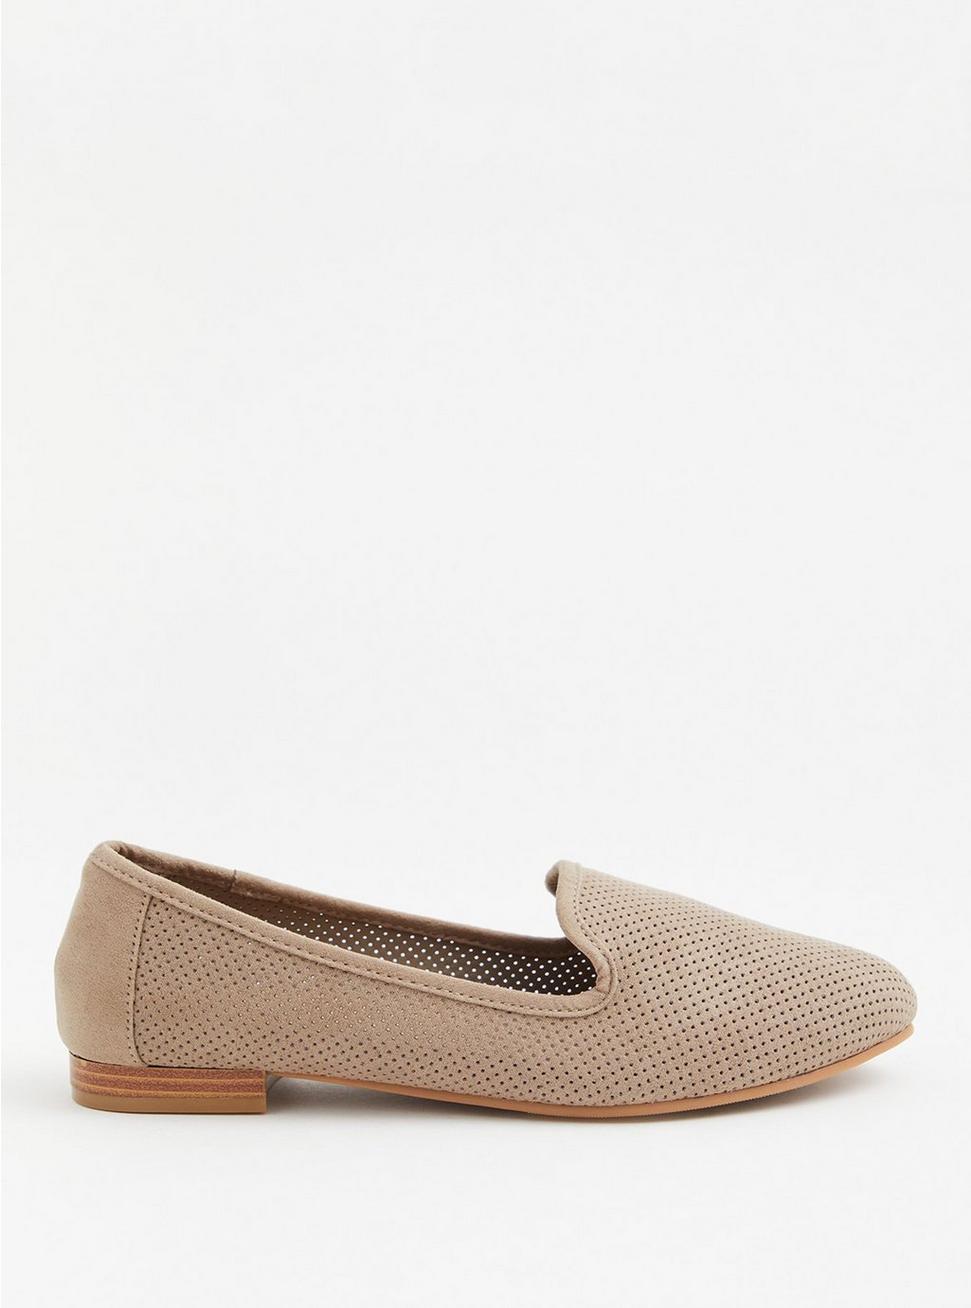 Plus Size Perforated Loafer (WW), TAN BEIGE, alternate